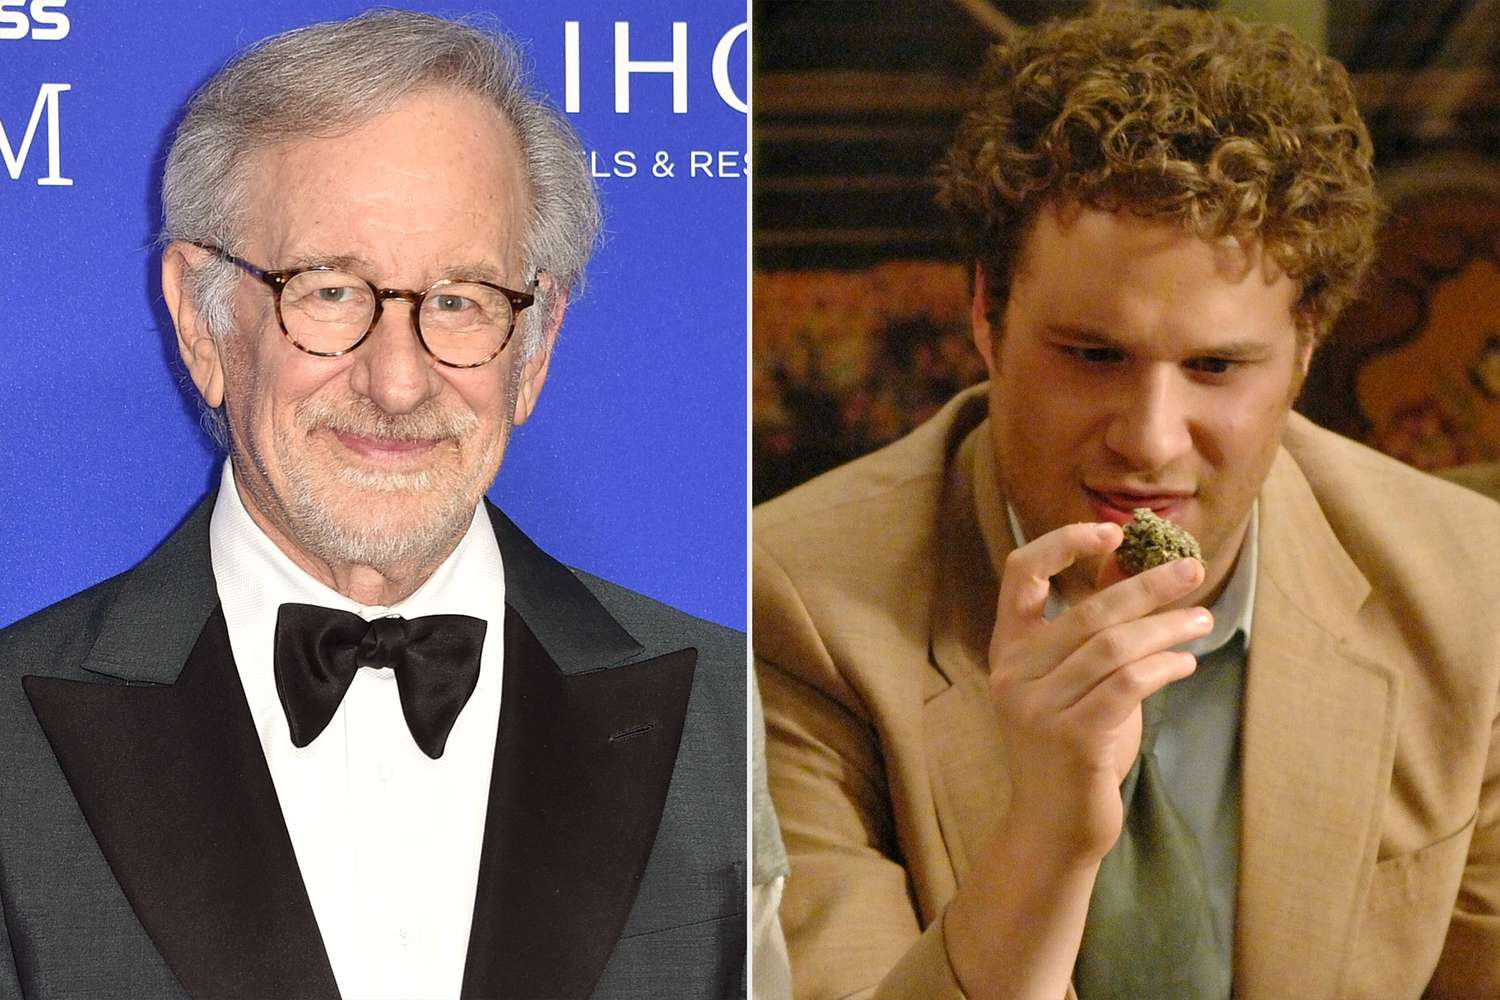 Steven Spielberg attends the 34th Annual Palm Springs International Film Festival's Film Awards Gala Arrivals at Palm Springs Convention Center on January 05, 2023 in Palm Springs, California. (Photo by David Crotty/Patrick McMullan via Getty Images); PINEAPPLE EXPRESS, from left: James Franco, Seth Rogen, 2008, © Columbia/courtesy Everett Collection